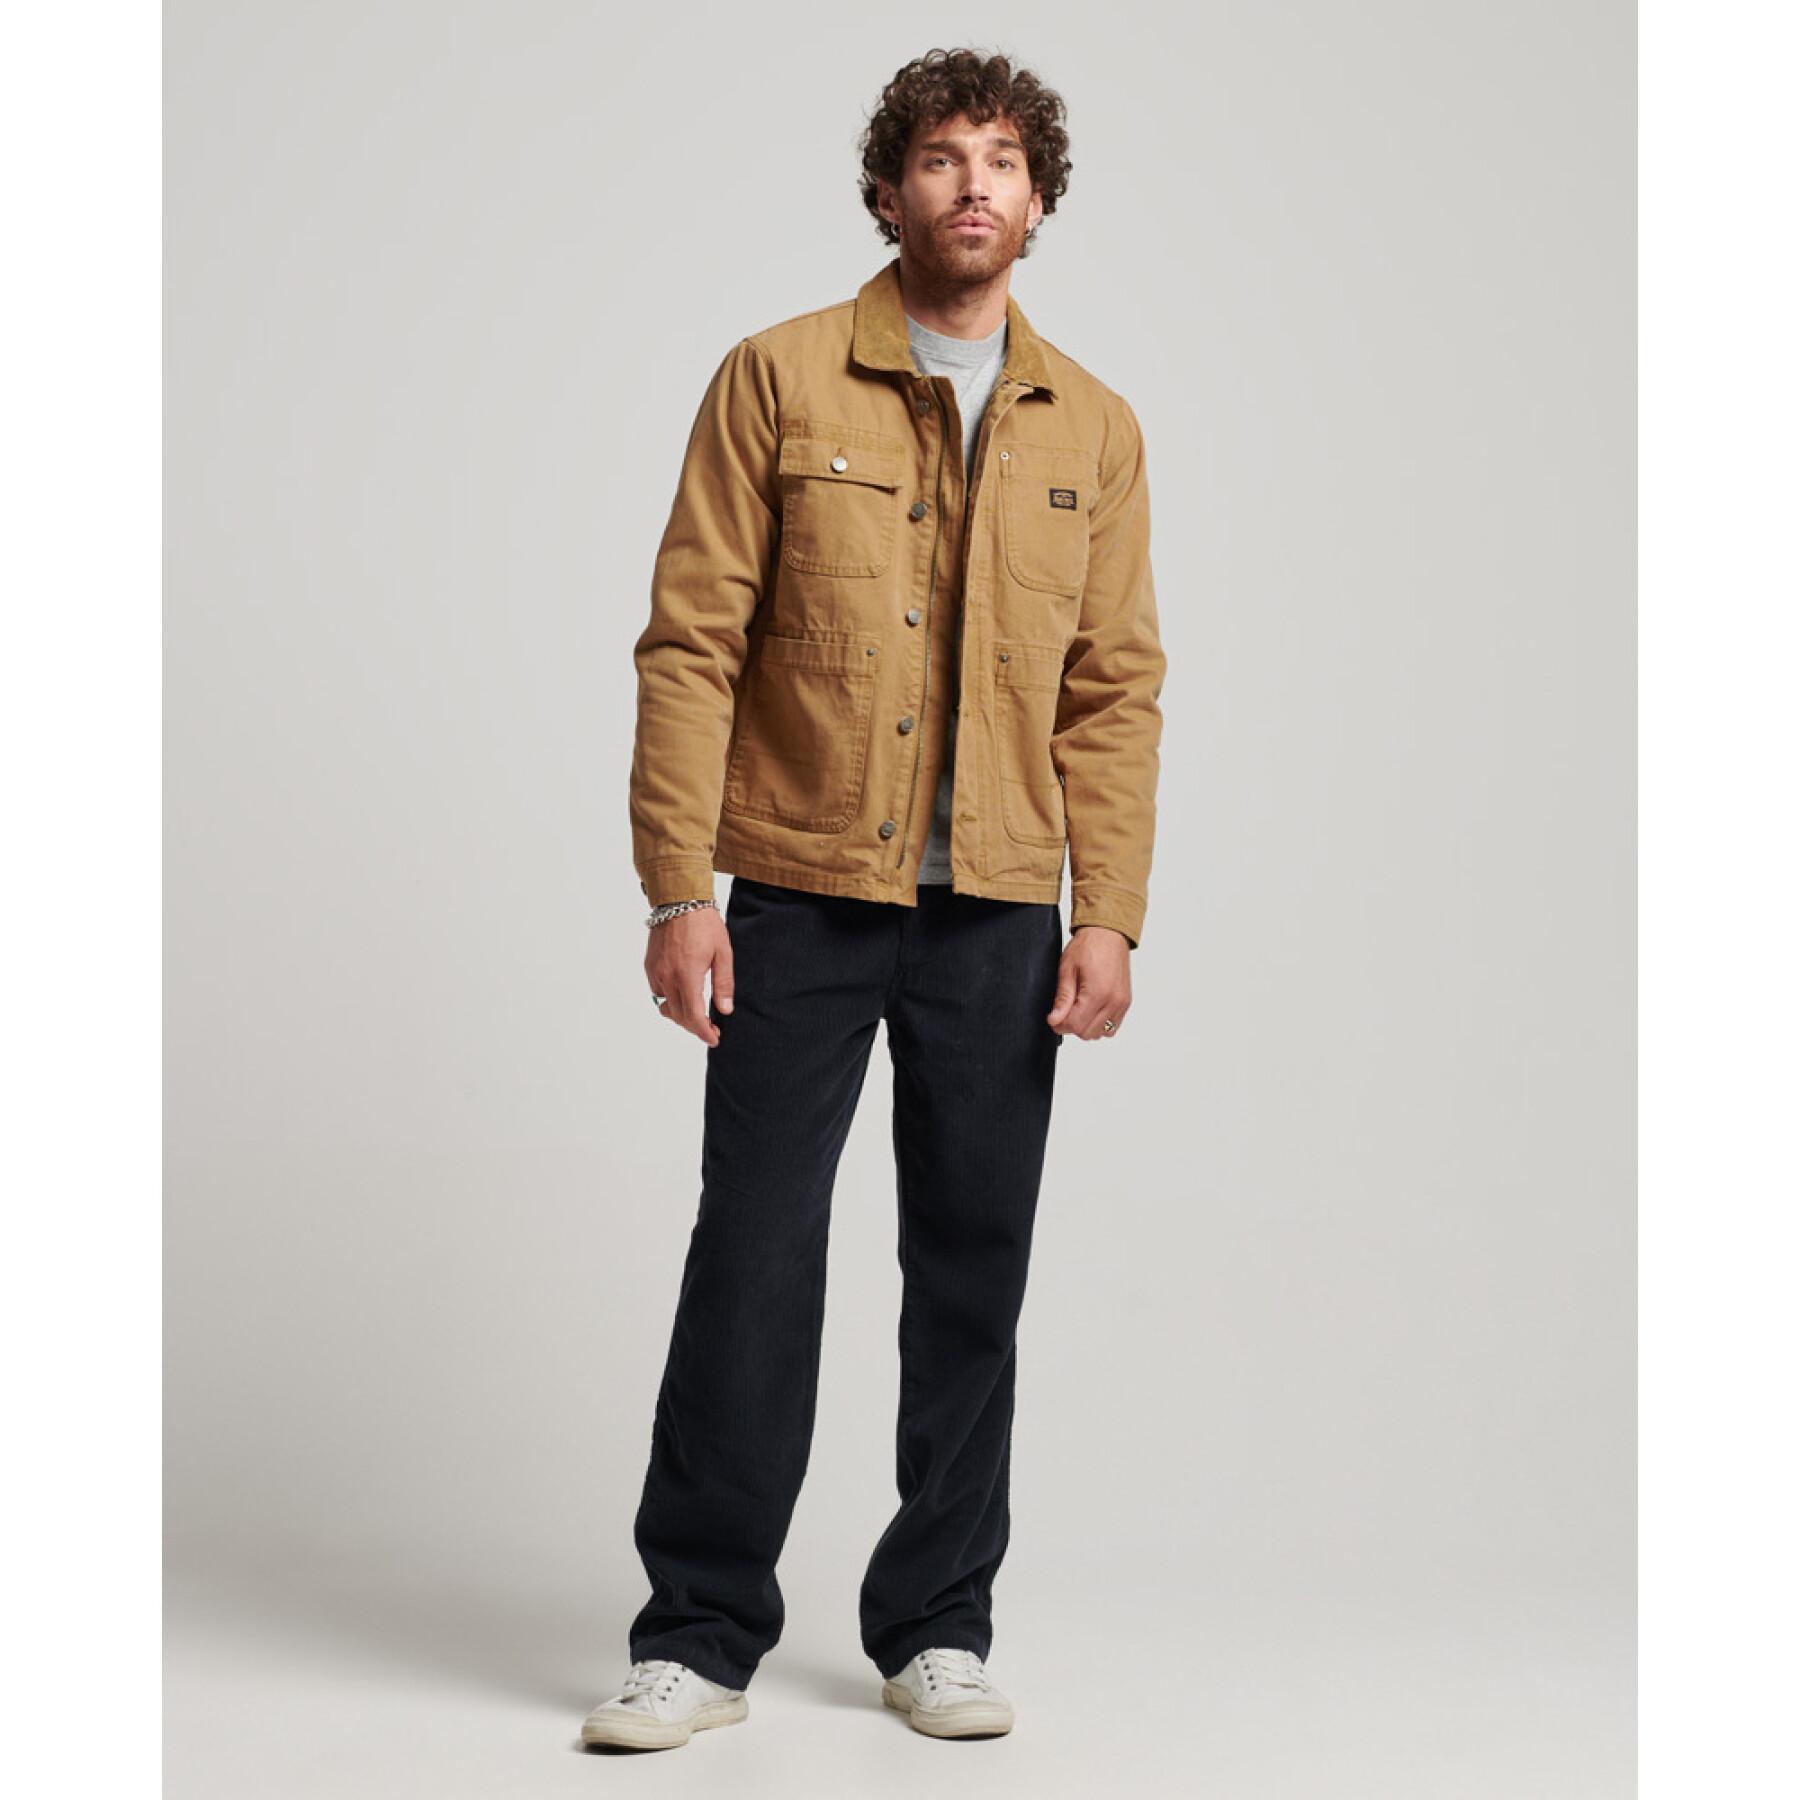 Ranch style jacket Superdry